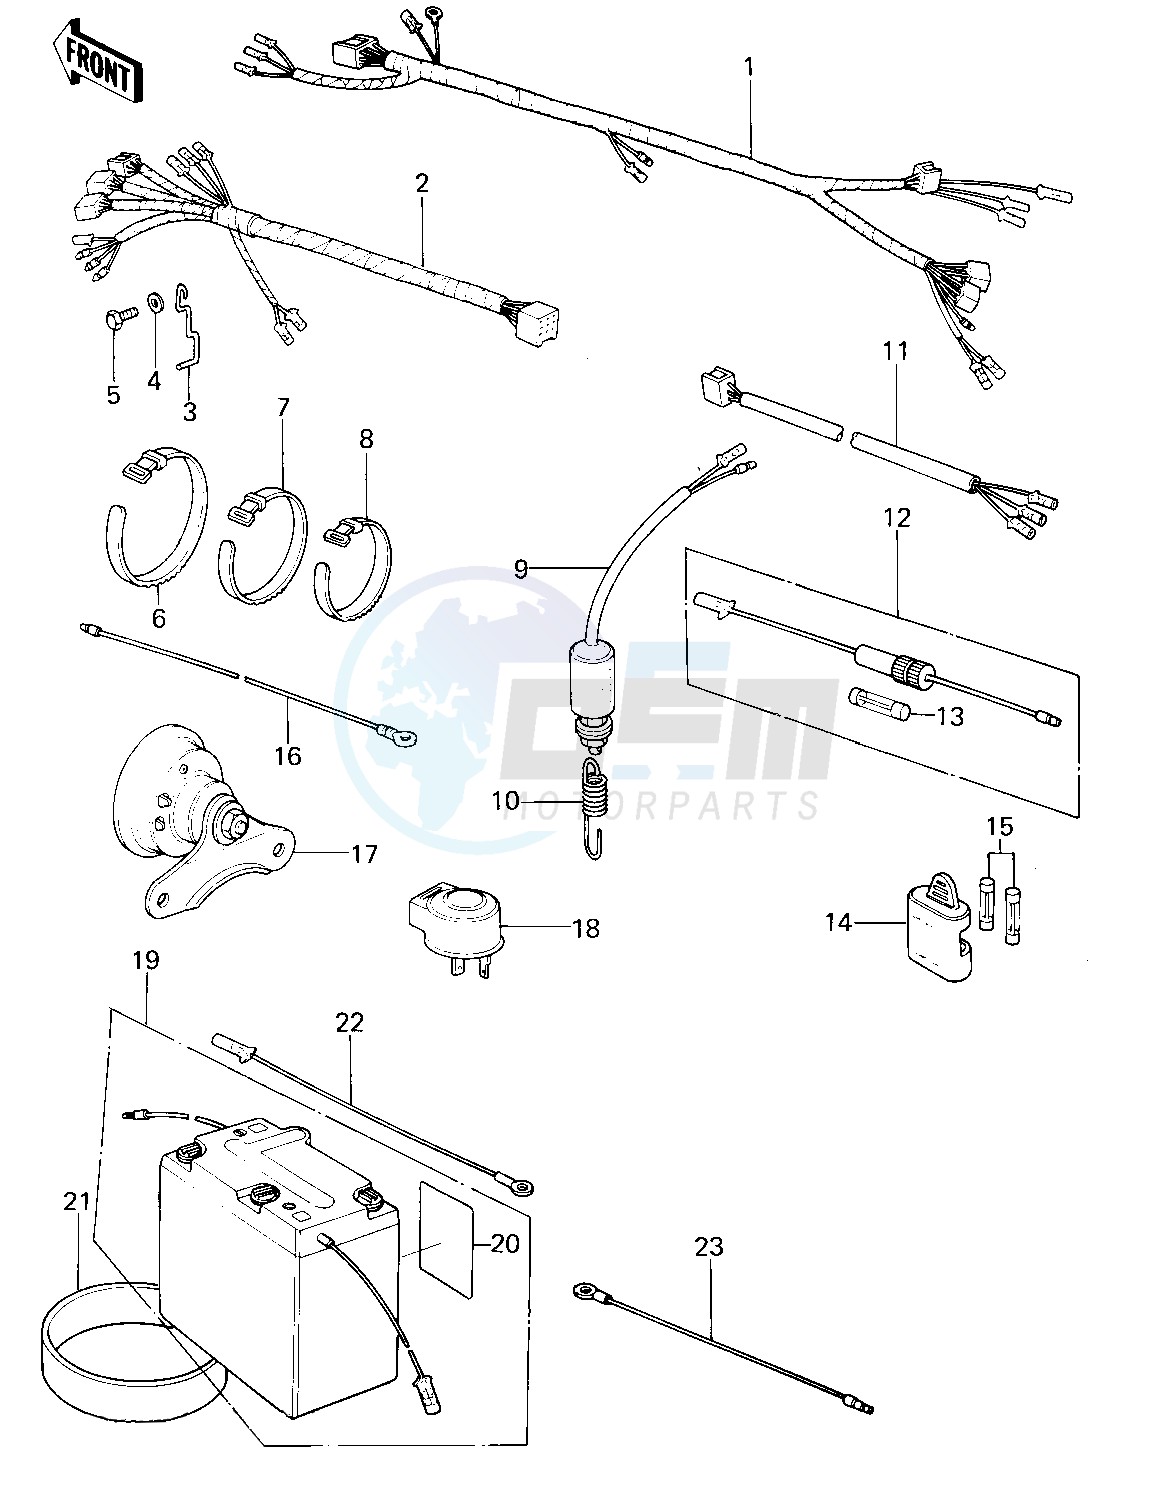 CHASSIS ELECTRICAL EQUIPMENT -- 78-79 KL250-A1_A1A_A2- - blueprint